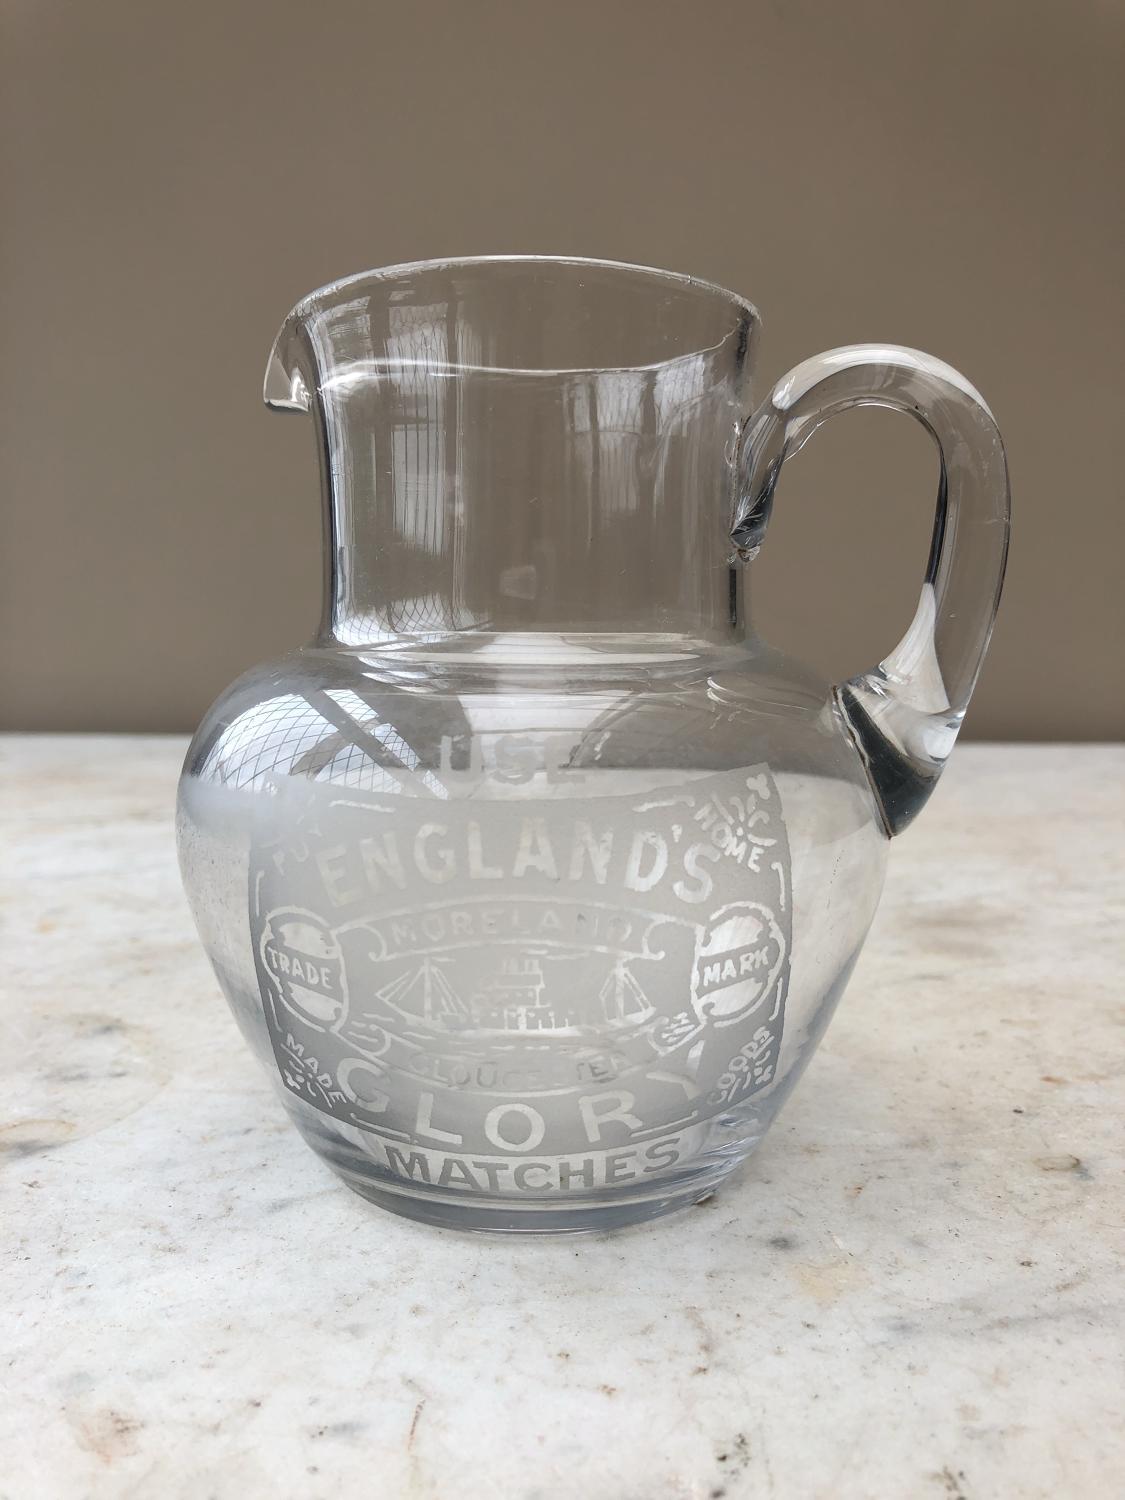 Early 20thC Glass Advertising Water Jug - Englands Glory Matches